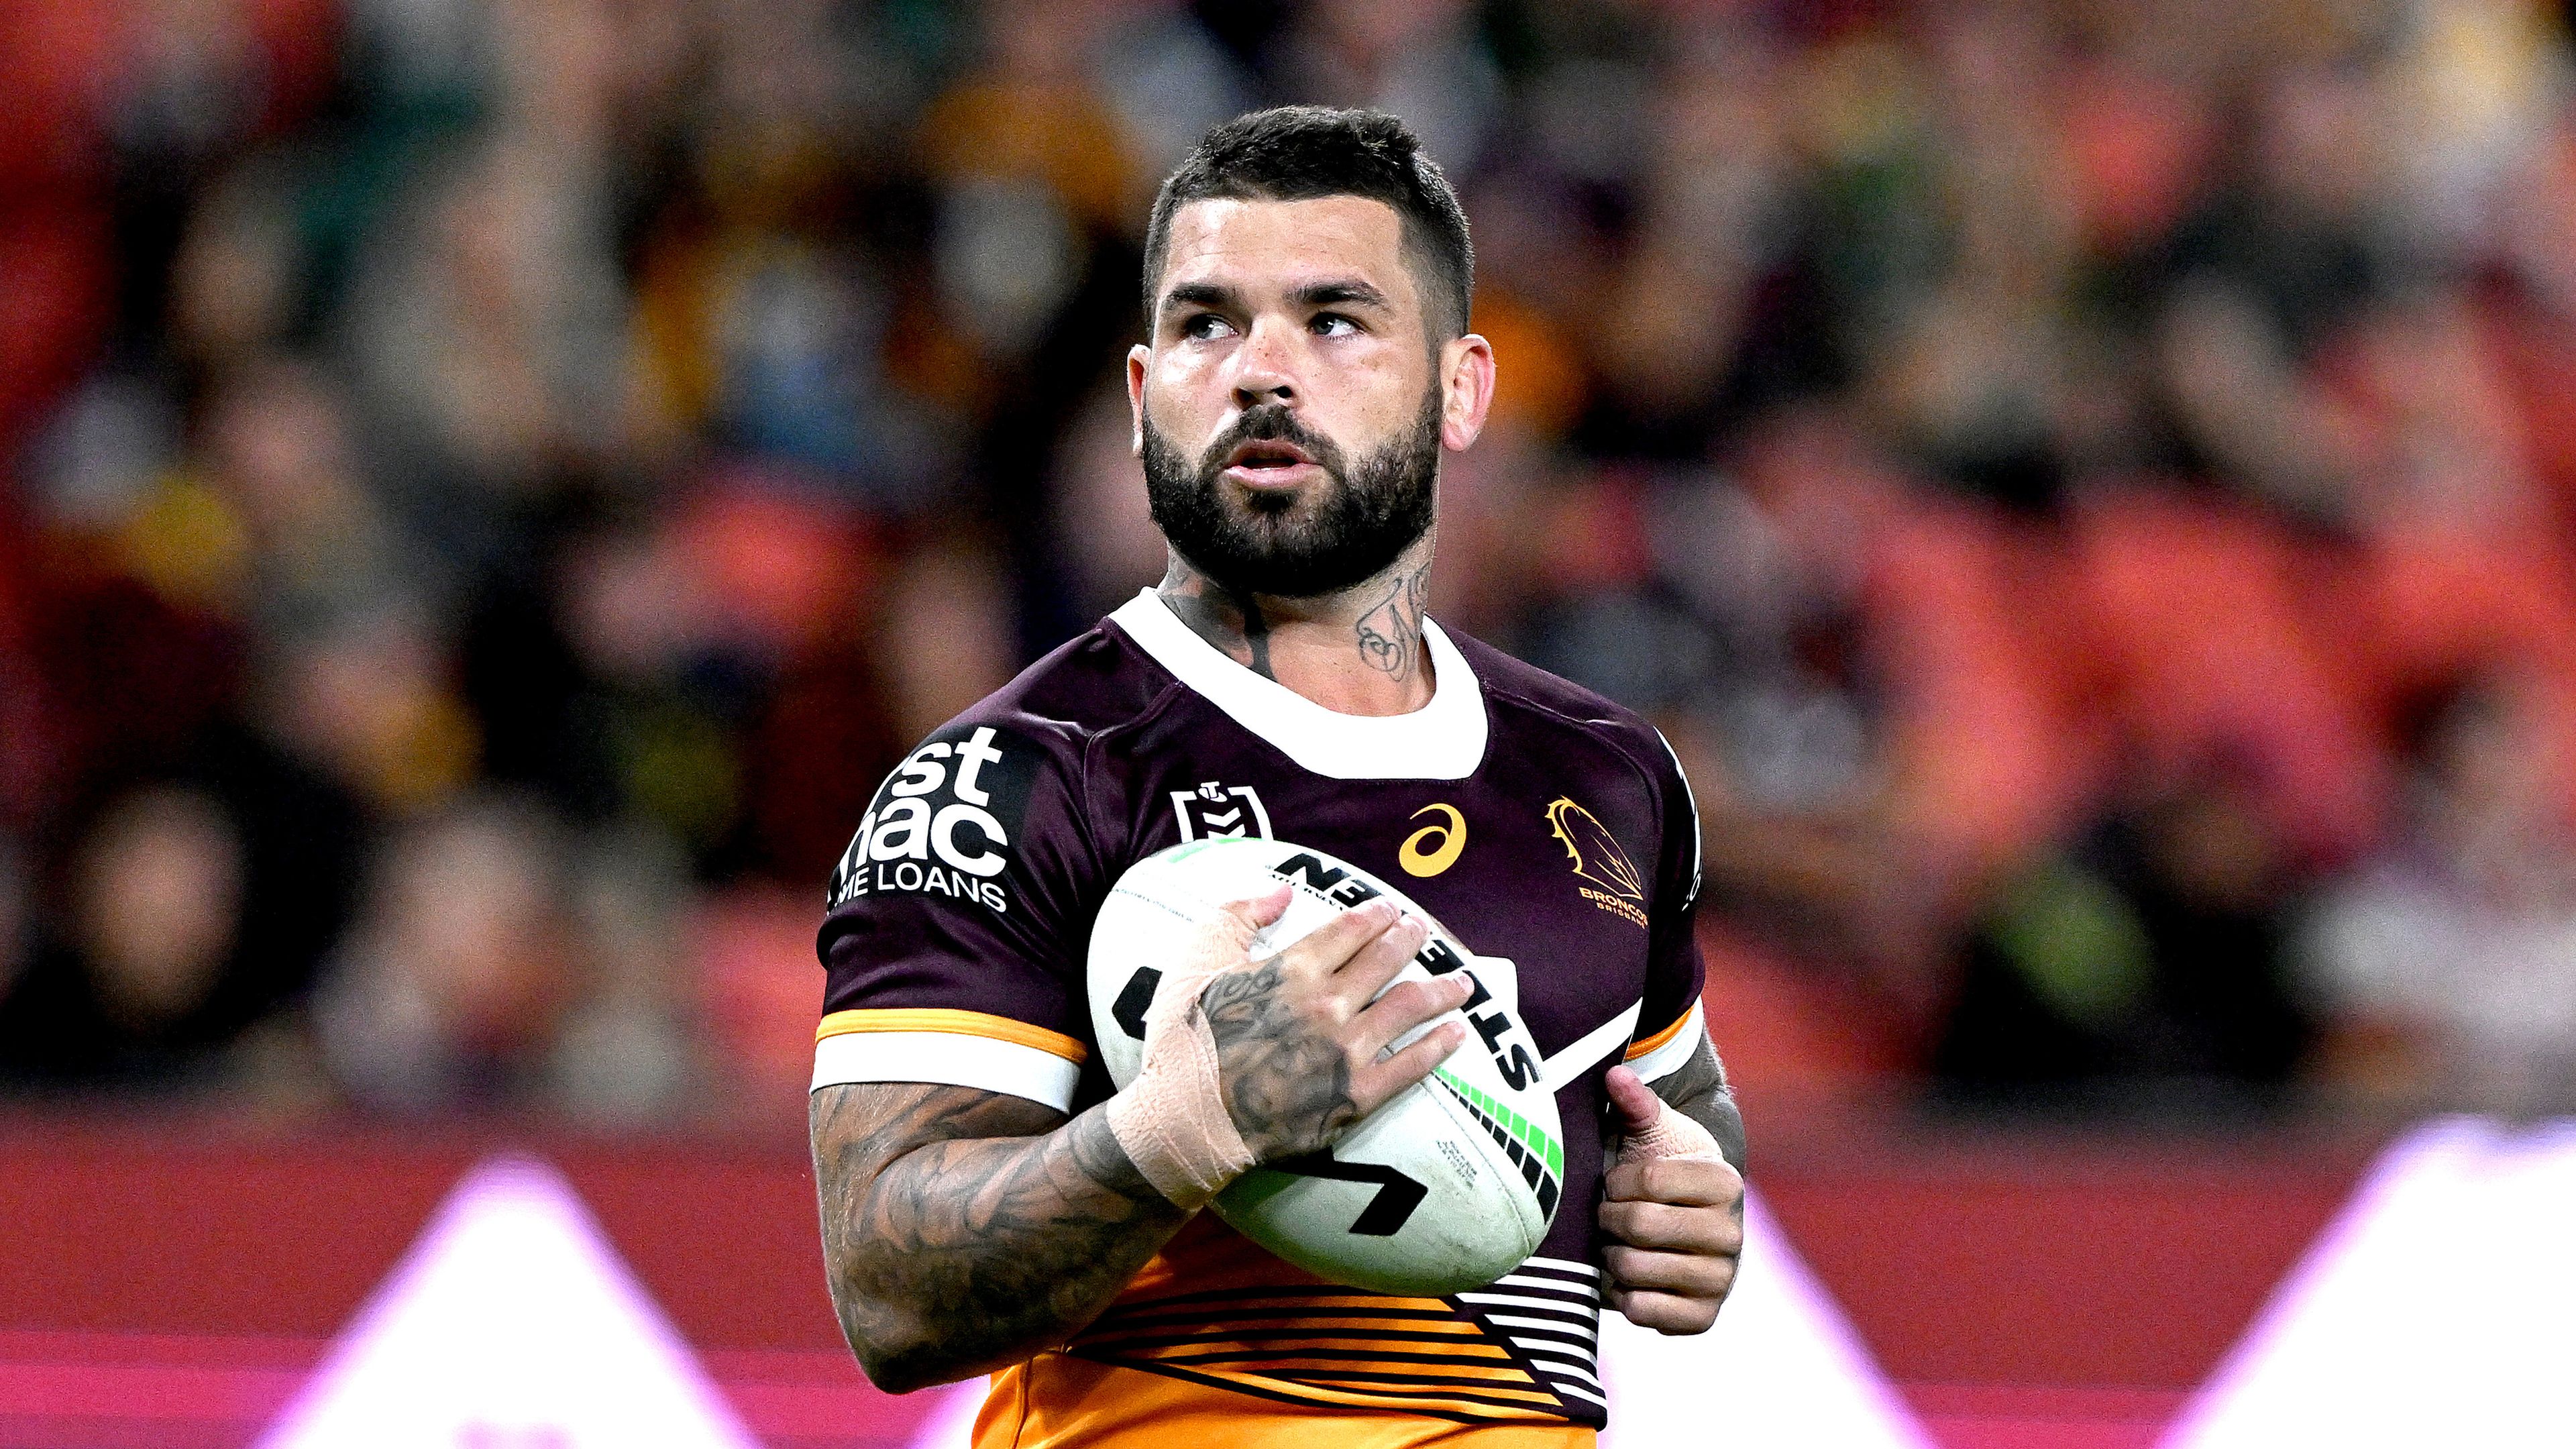 EXCLUSIVE: Broncos 'need to win now' after Adam Reynolds contract extension, says Phil Gould